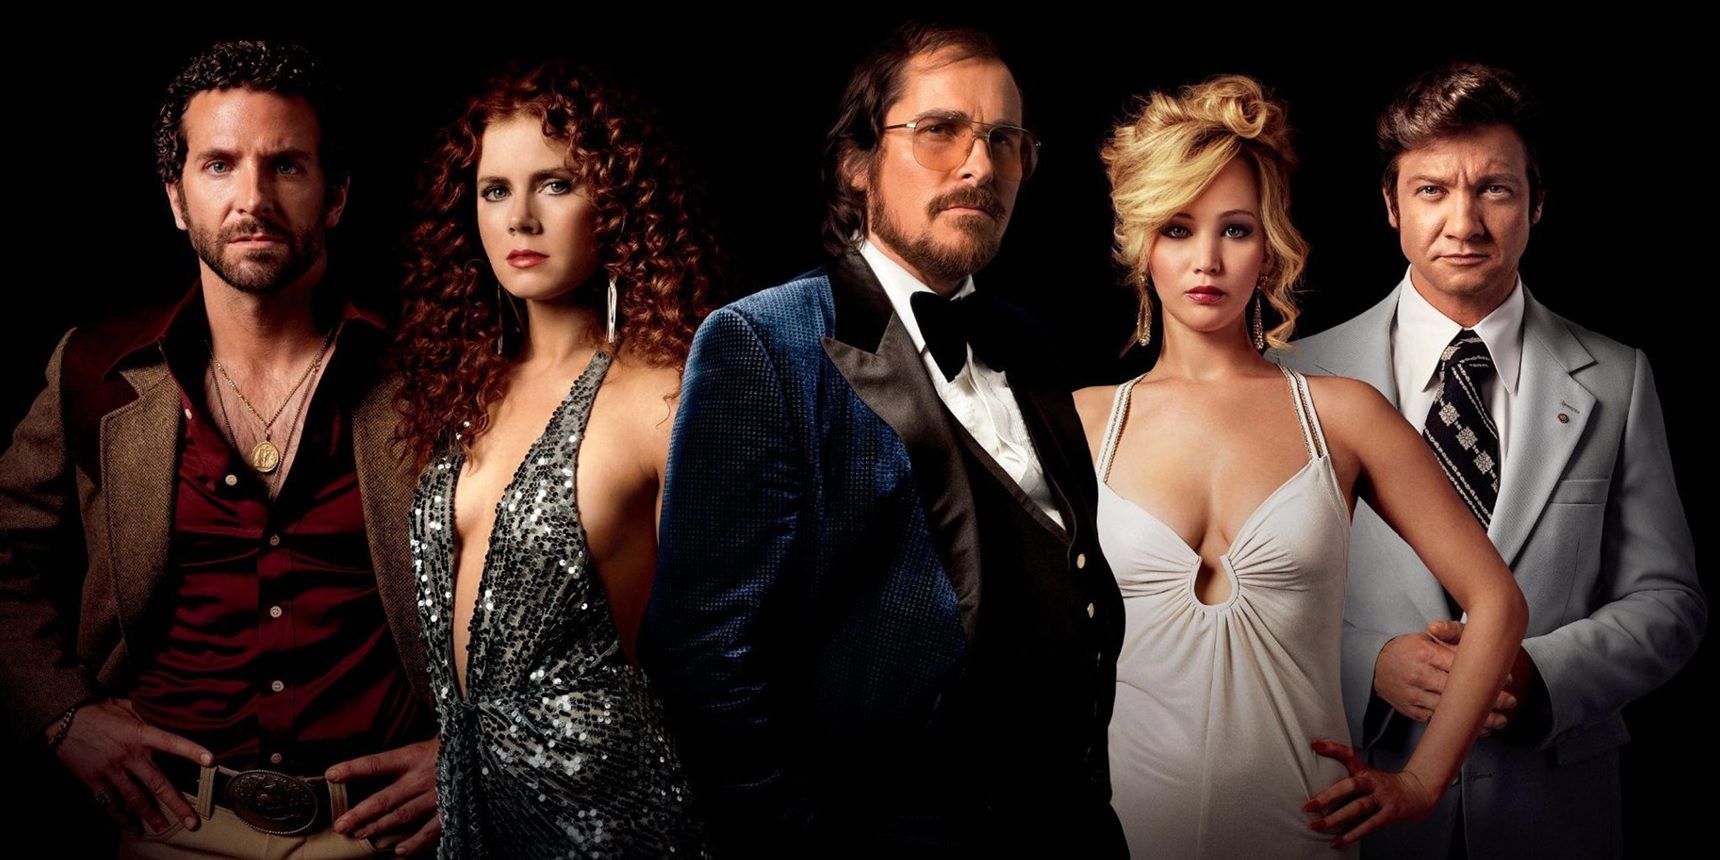 The poster for American Hustle featuring the cast